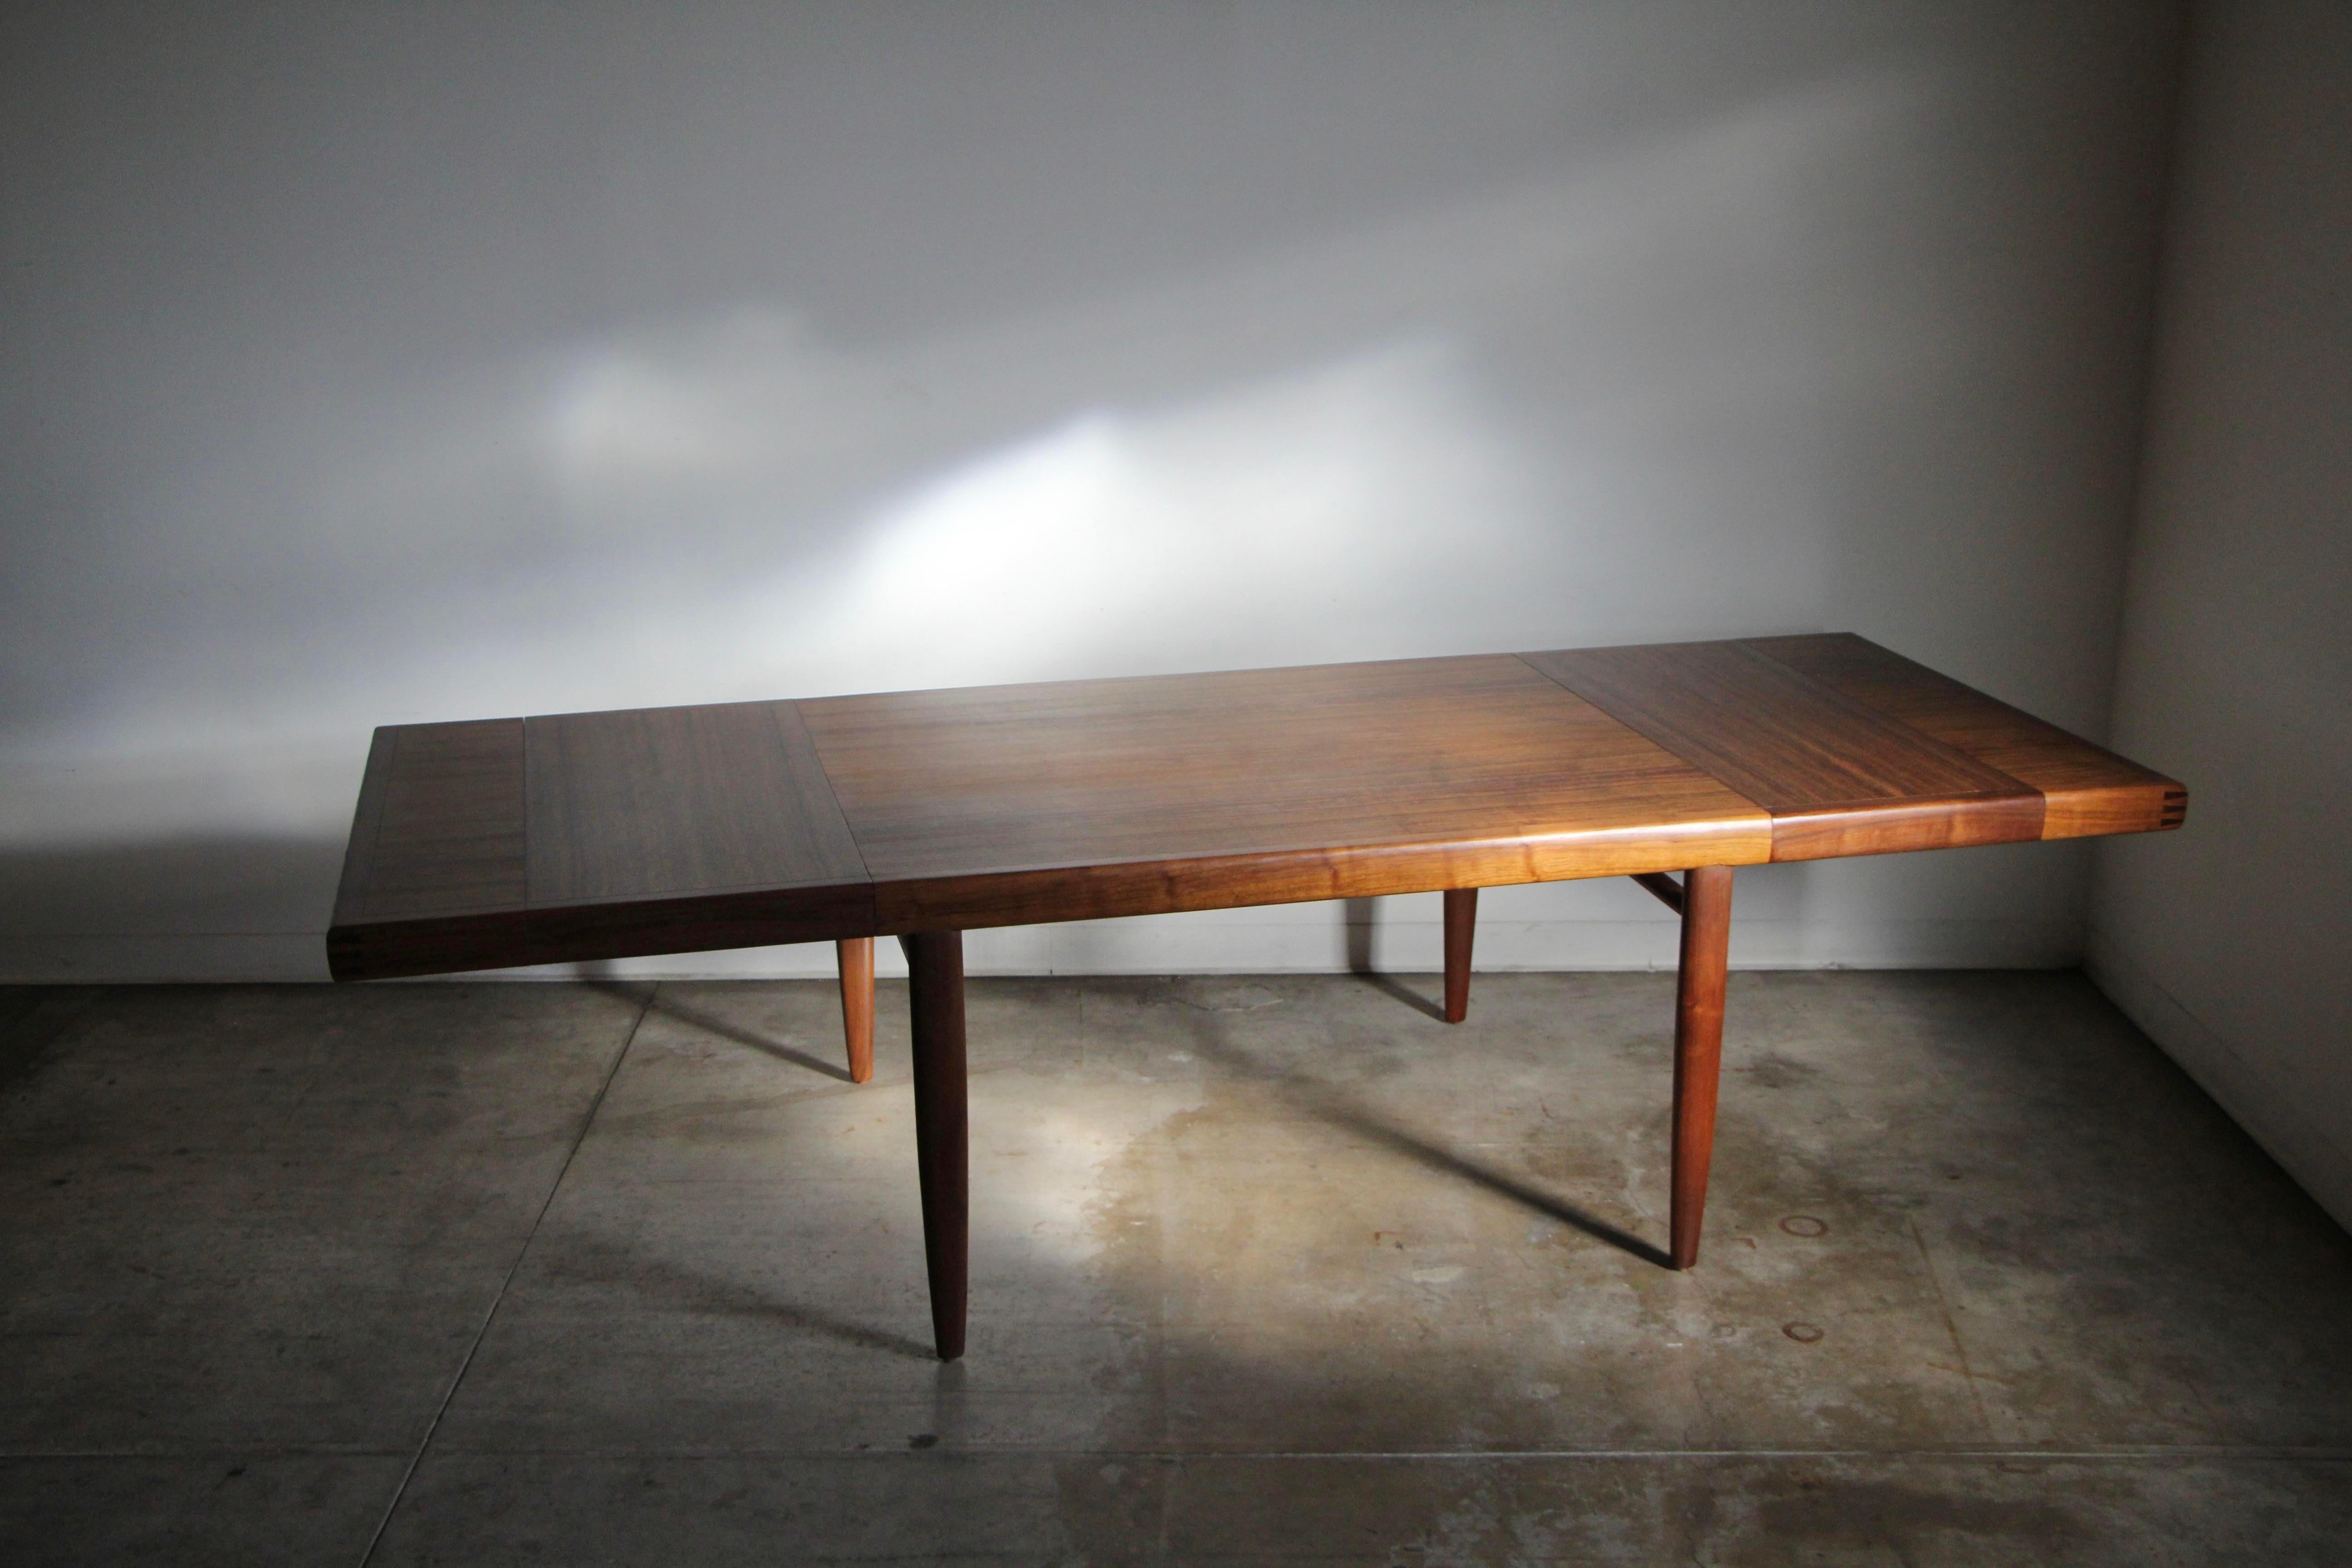 A stunning Mid-Century Modern extension dining table by the master, George Nakashima, part of the 